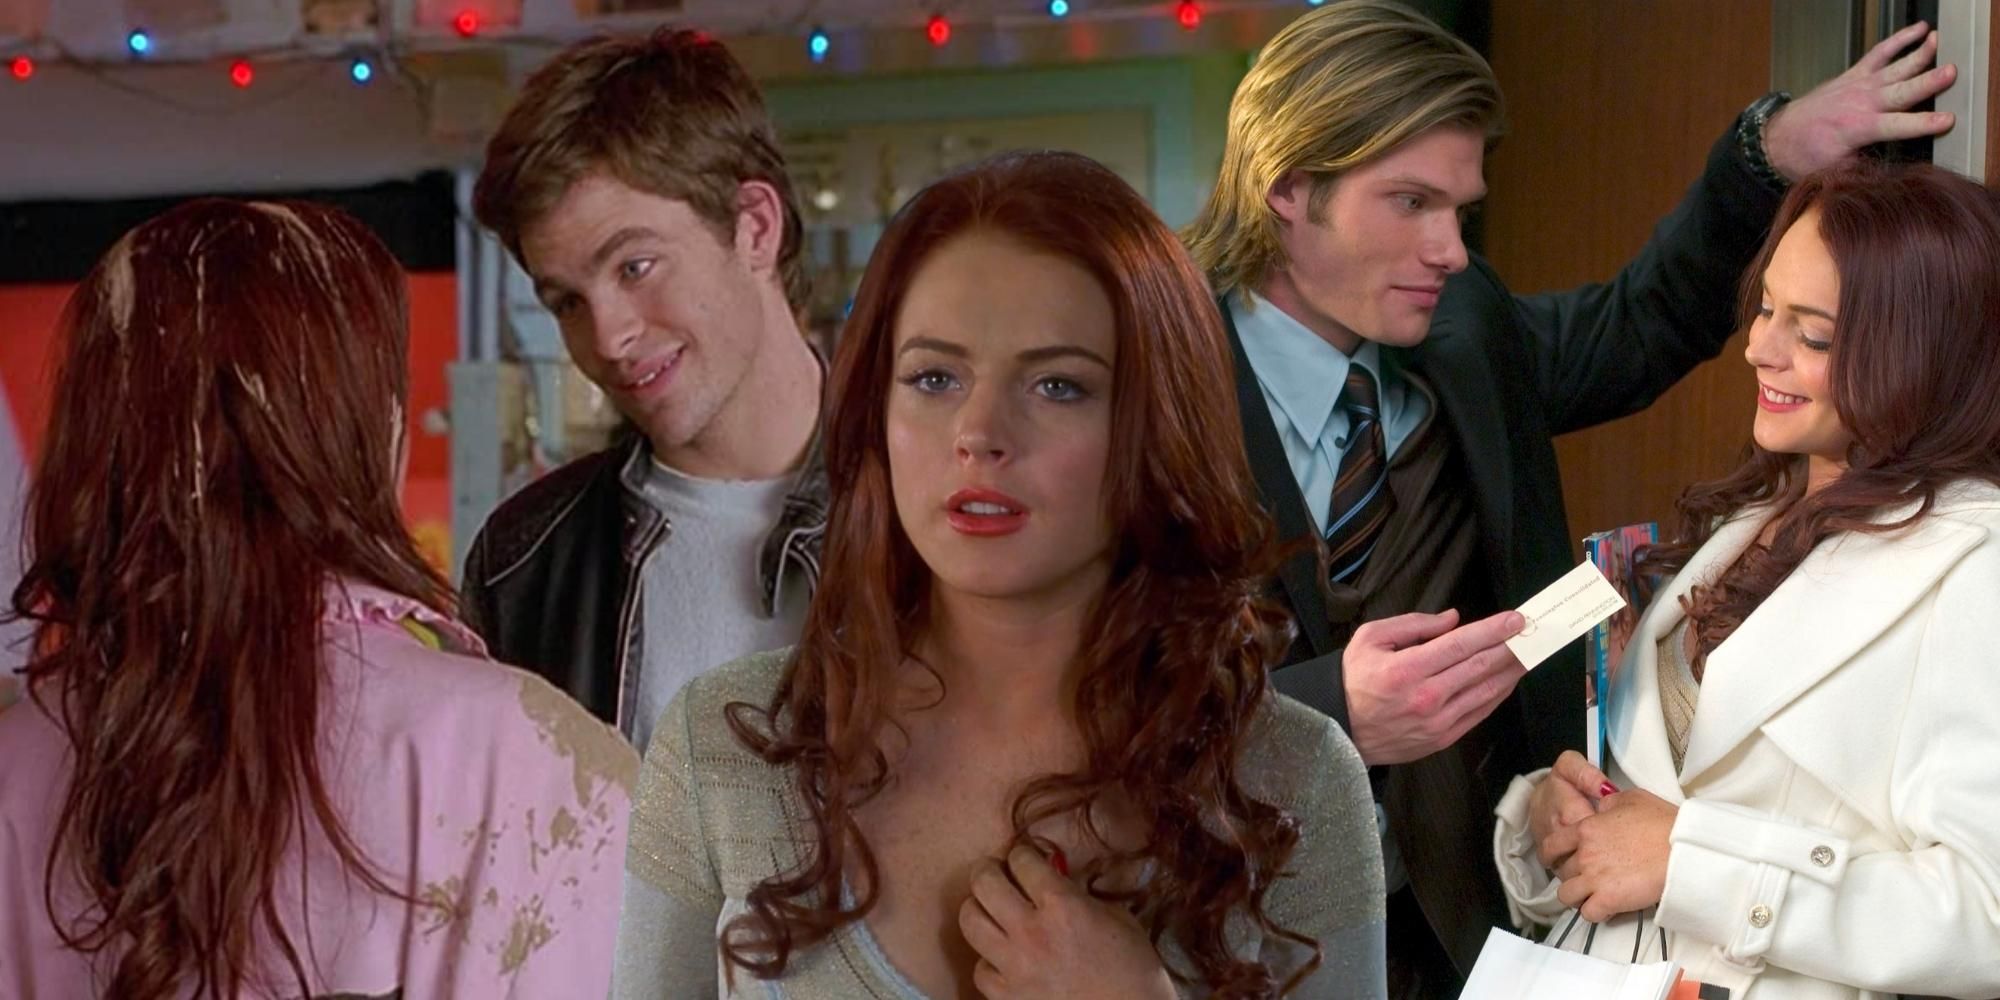 Lindsay Lohan covered in bird poop, talking to Chris Evans and being given a card by Chris Carmack in Just My Luck